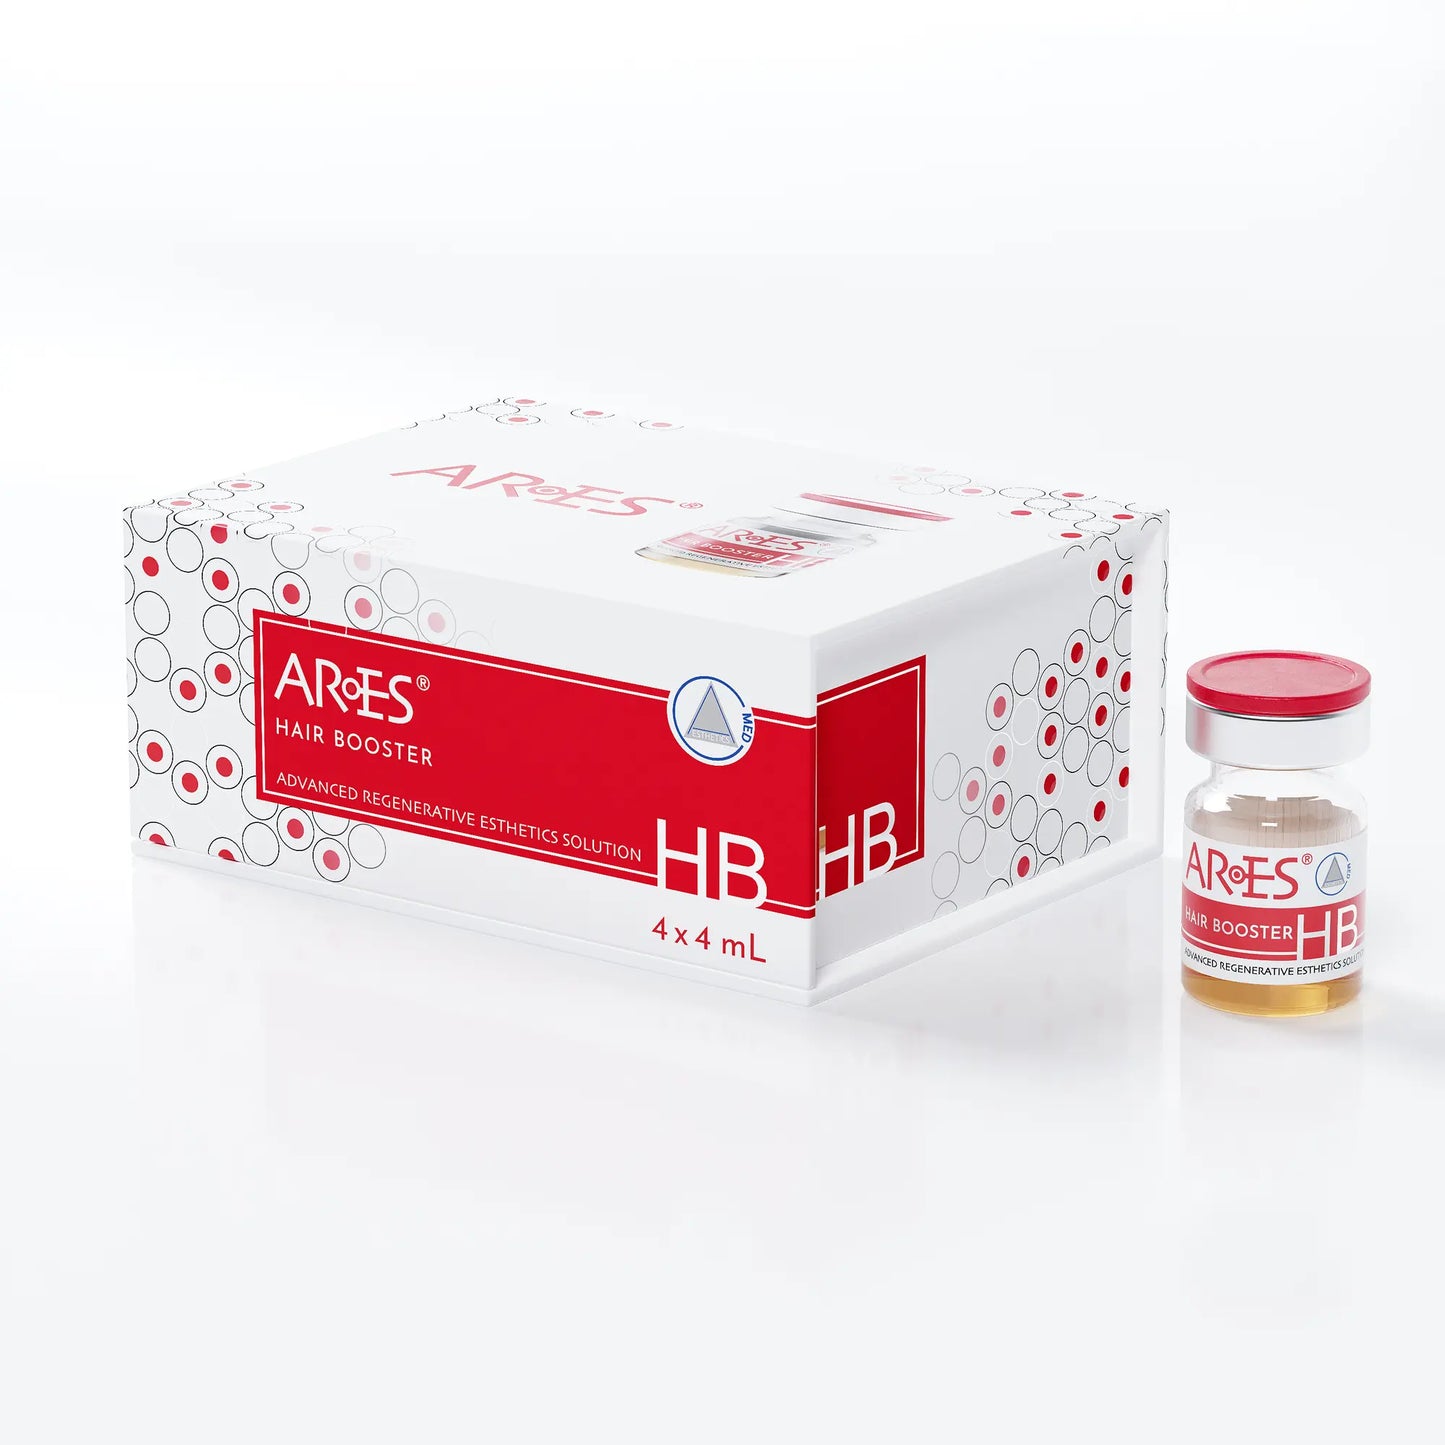 Ares HB Hair Booster